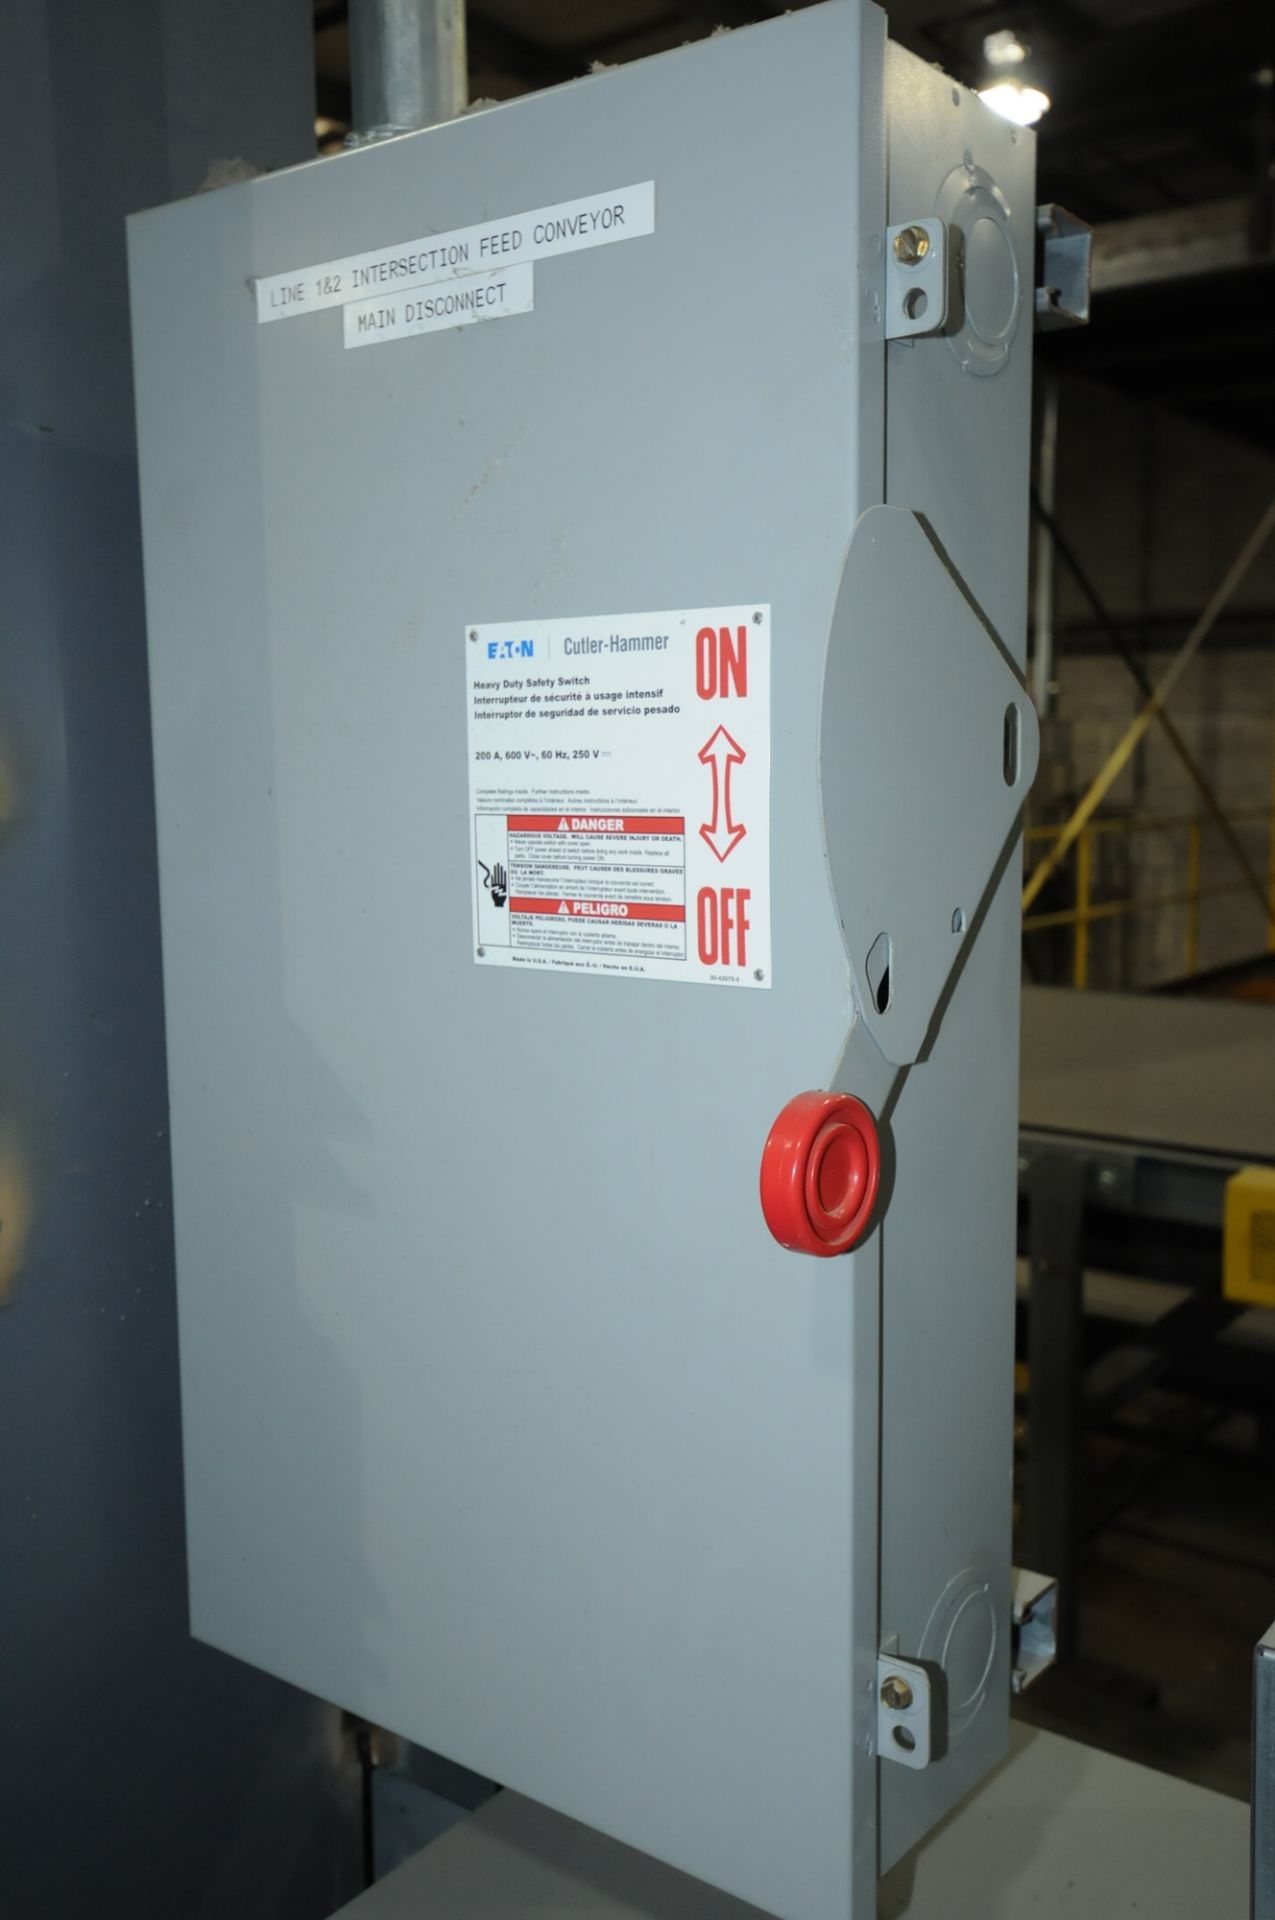 LOT/ HAMMOND 75 KVA 600V 3 PHASE DRY TYPE TRANSFORMER WITH EATON CUTLER-HAMMER 600V DISCONNECT BOX - Image 3 of 4